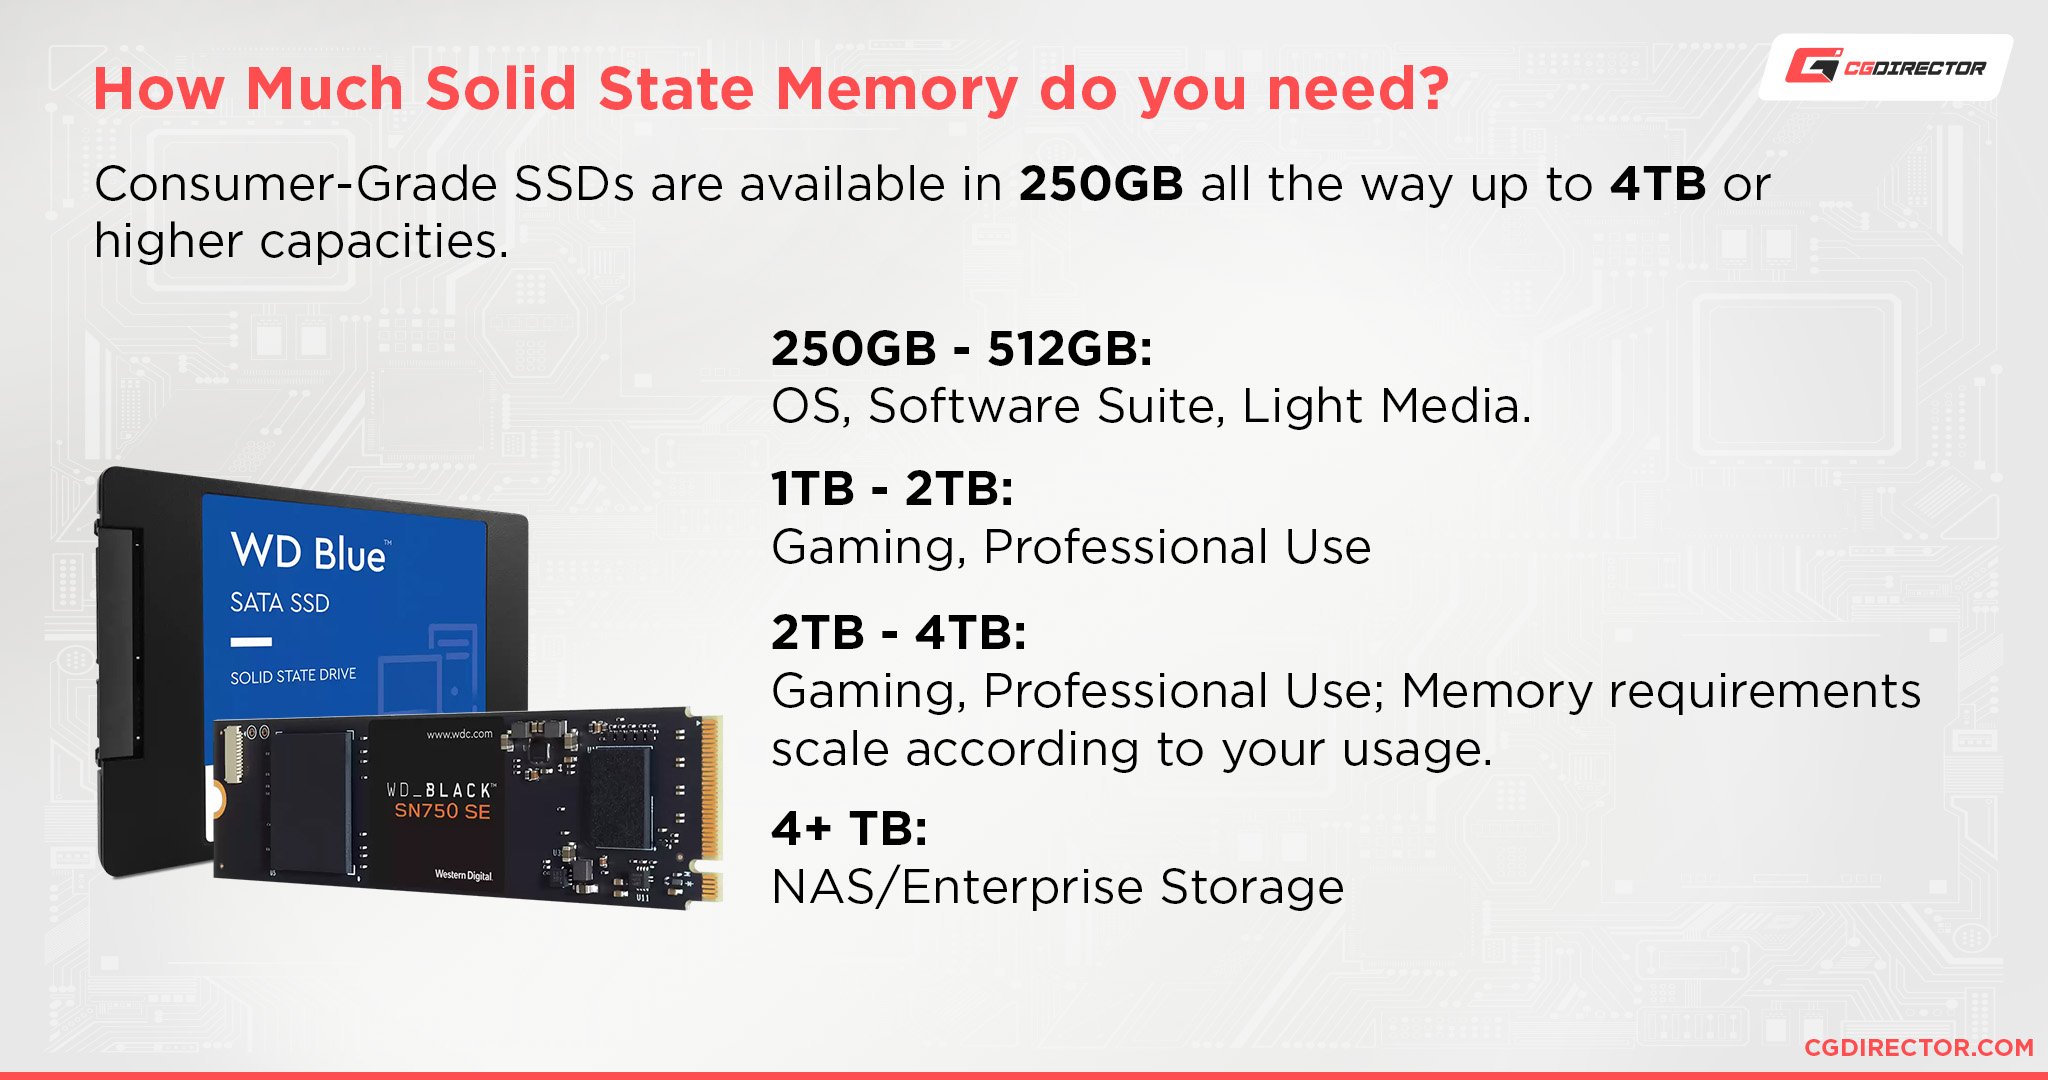 How Much Solid State Memory do you need